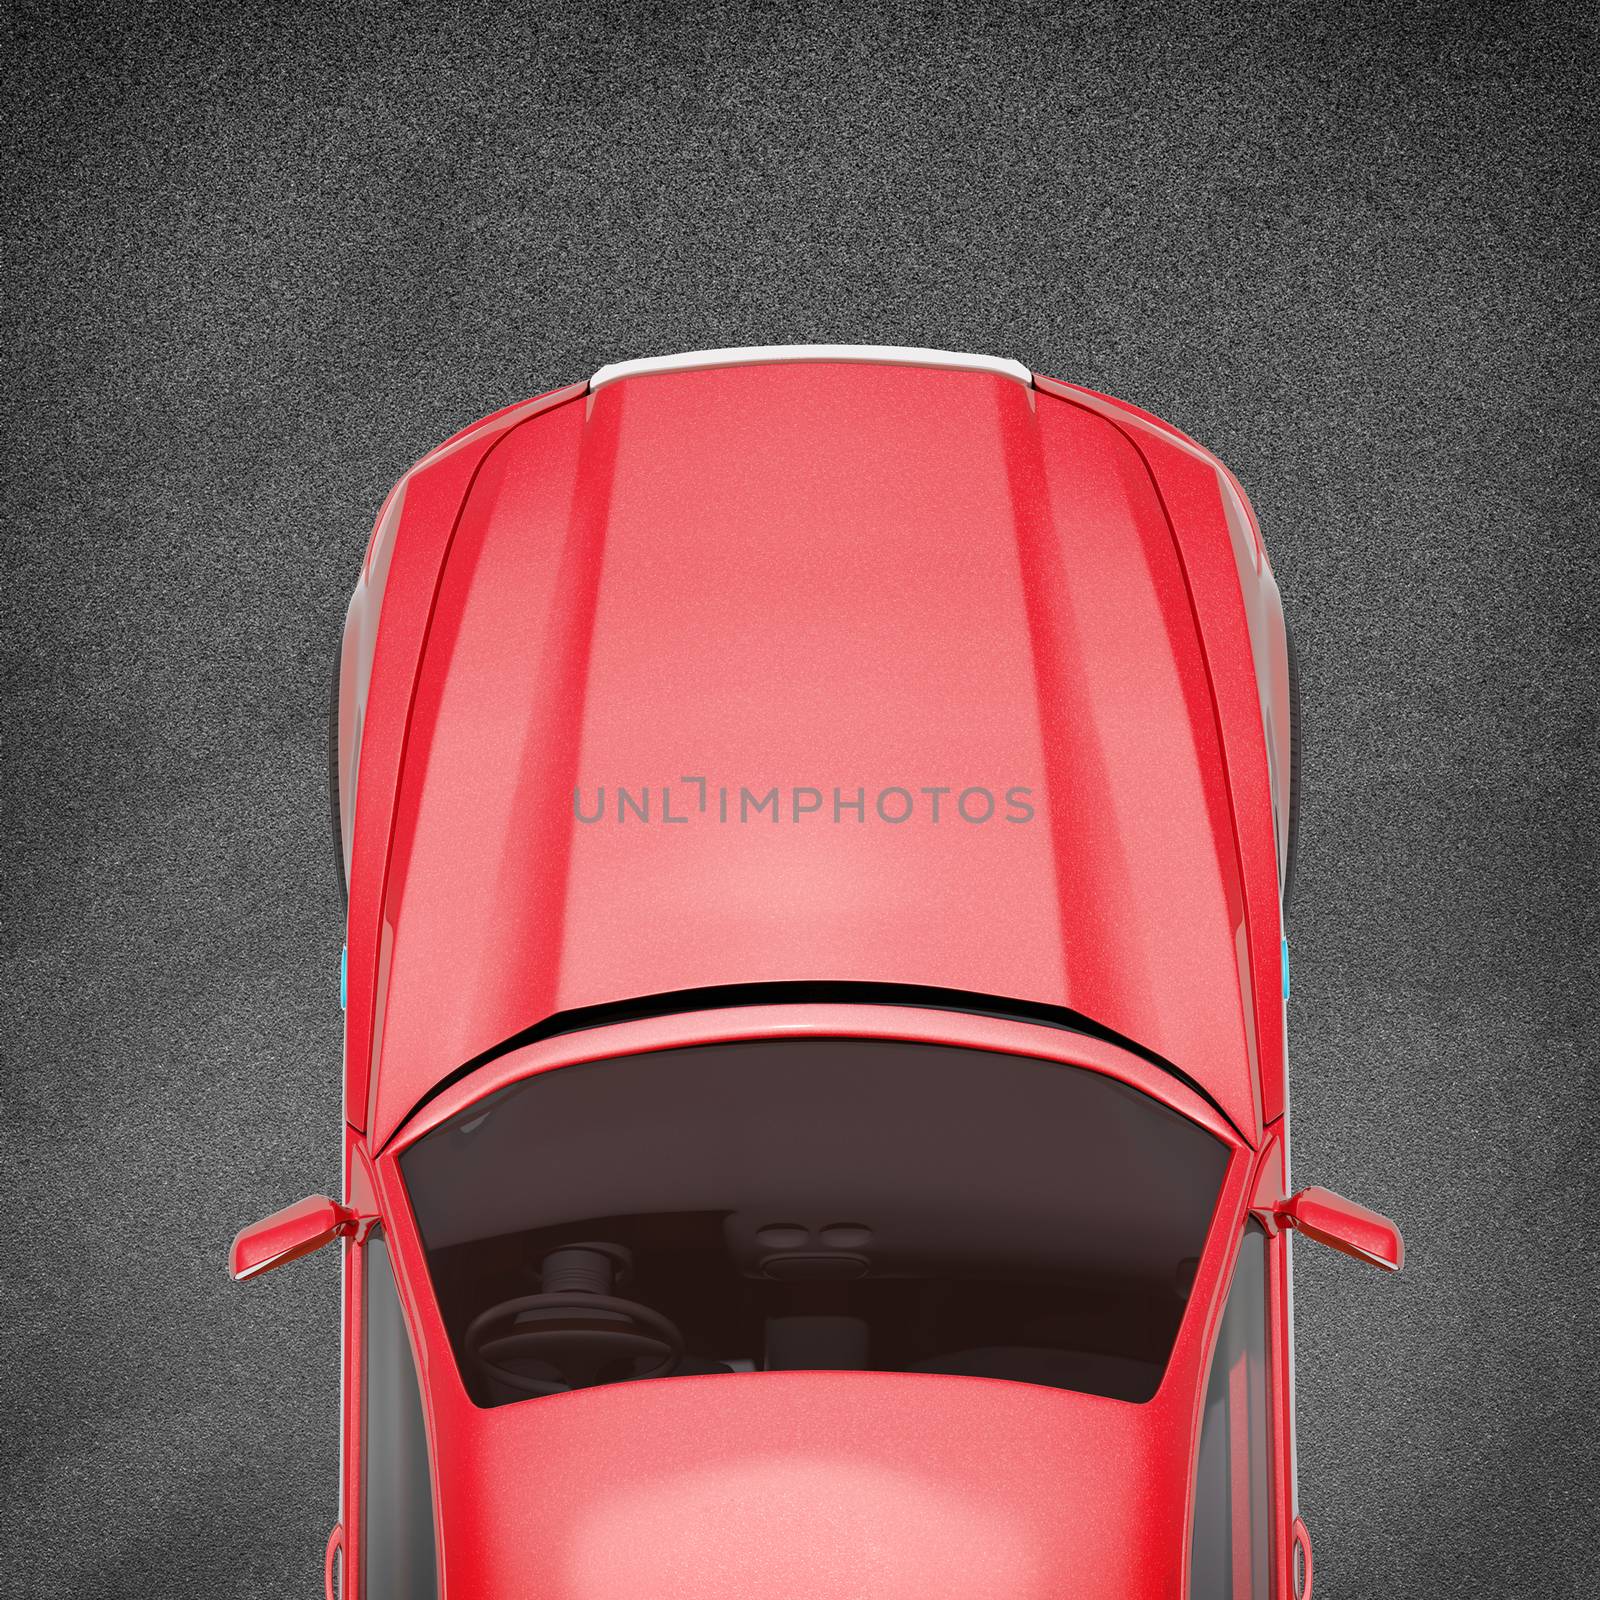 Red car on grey texture background with word success, top view